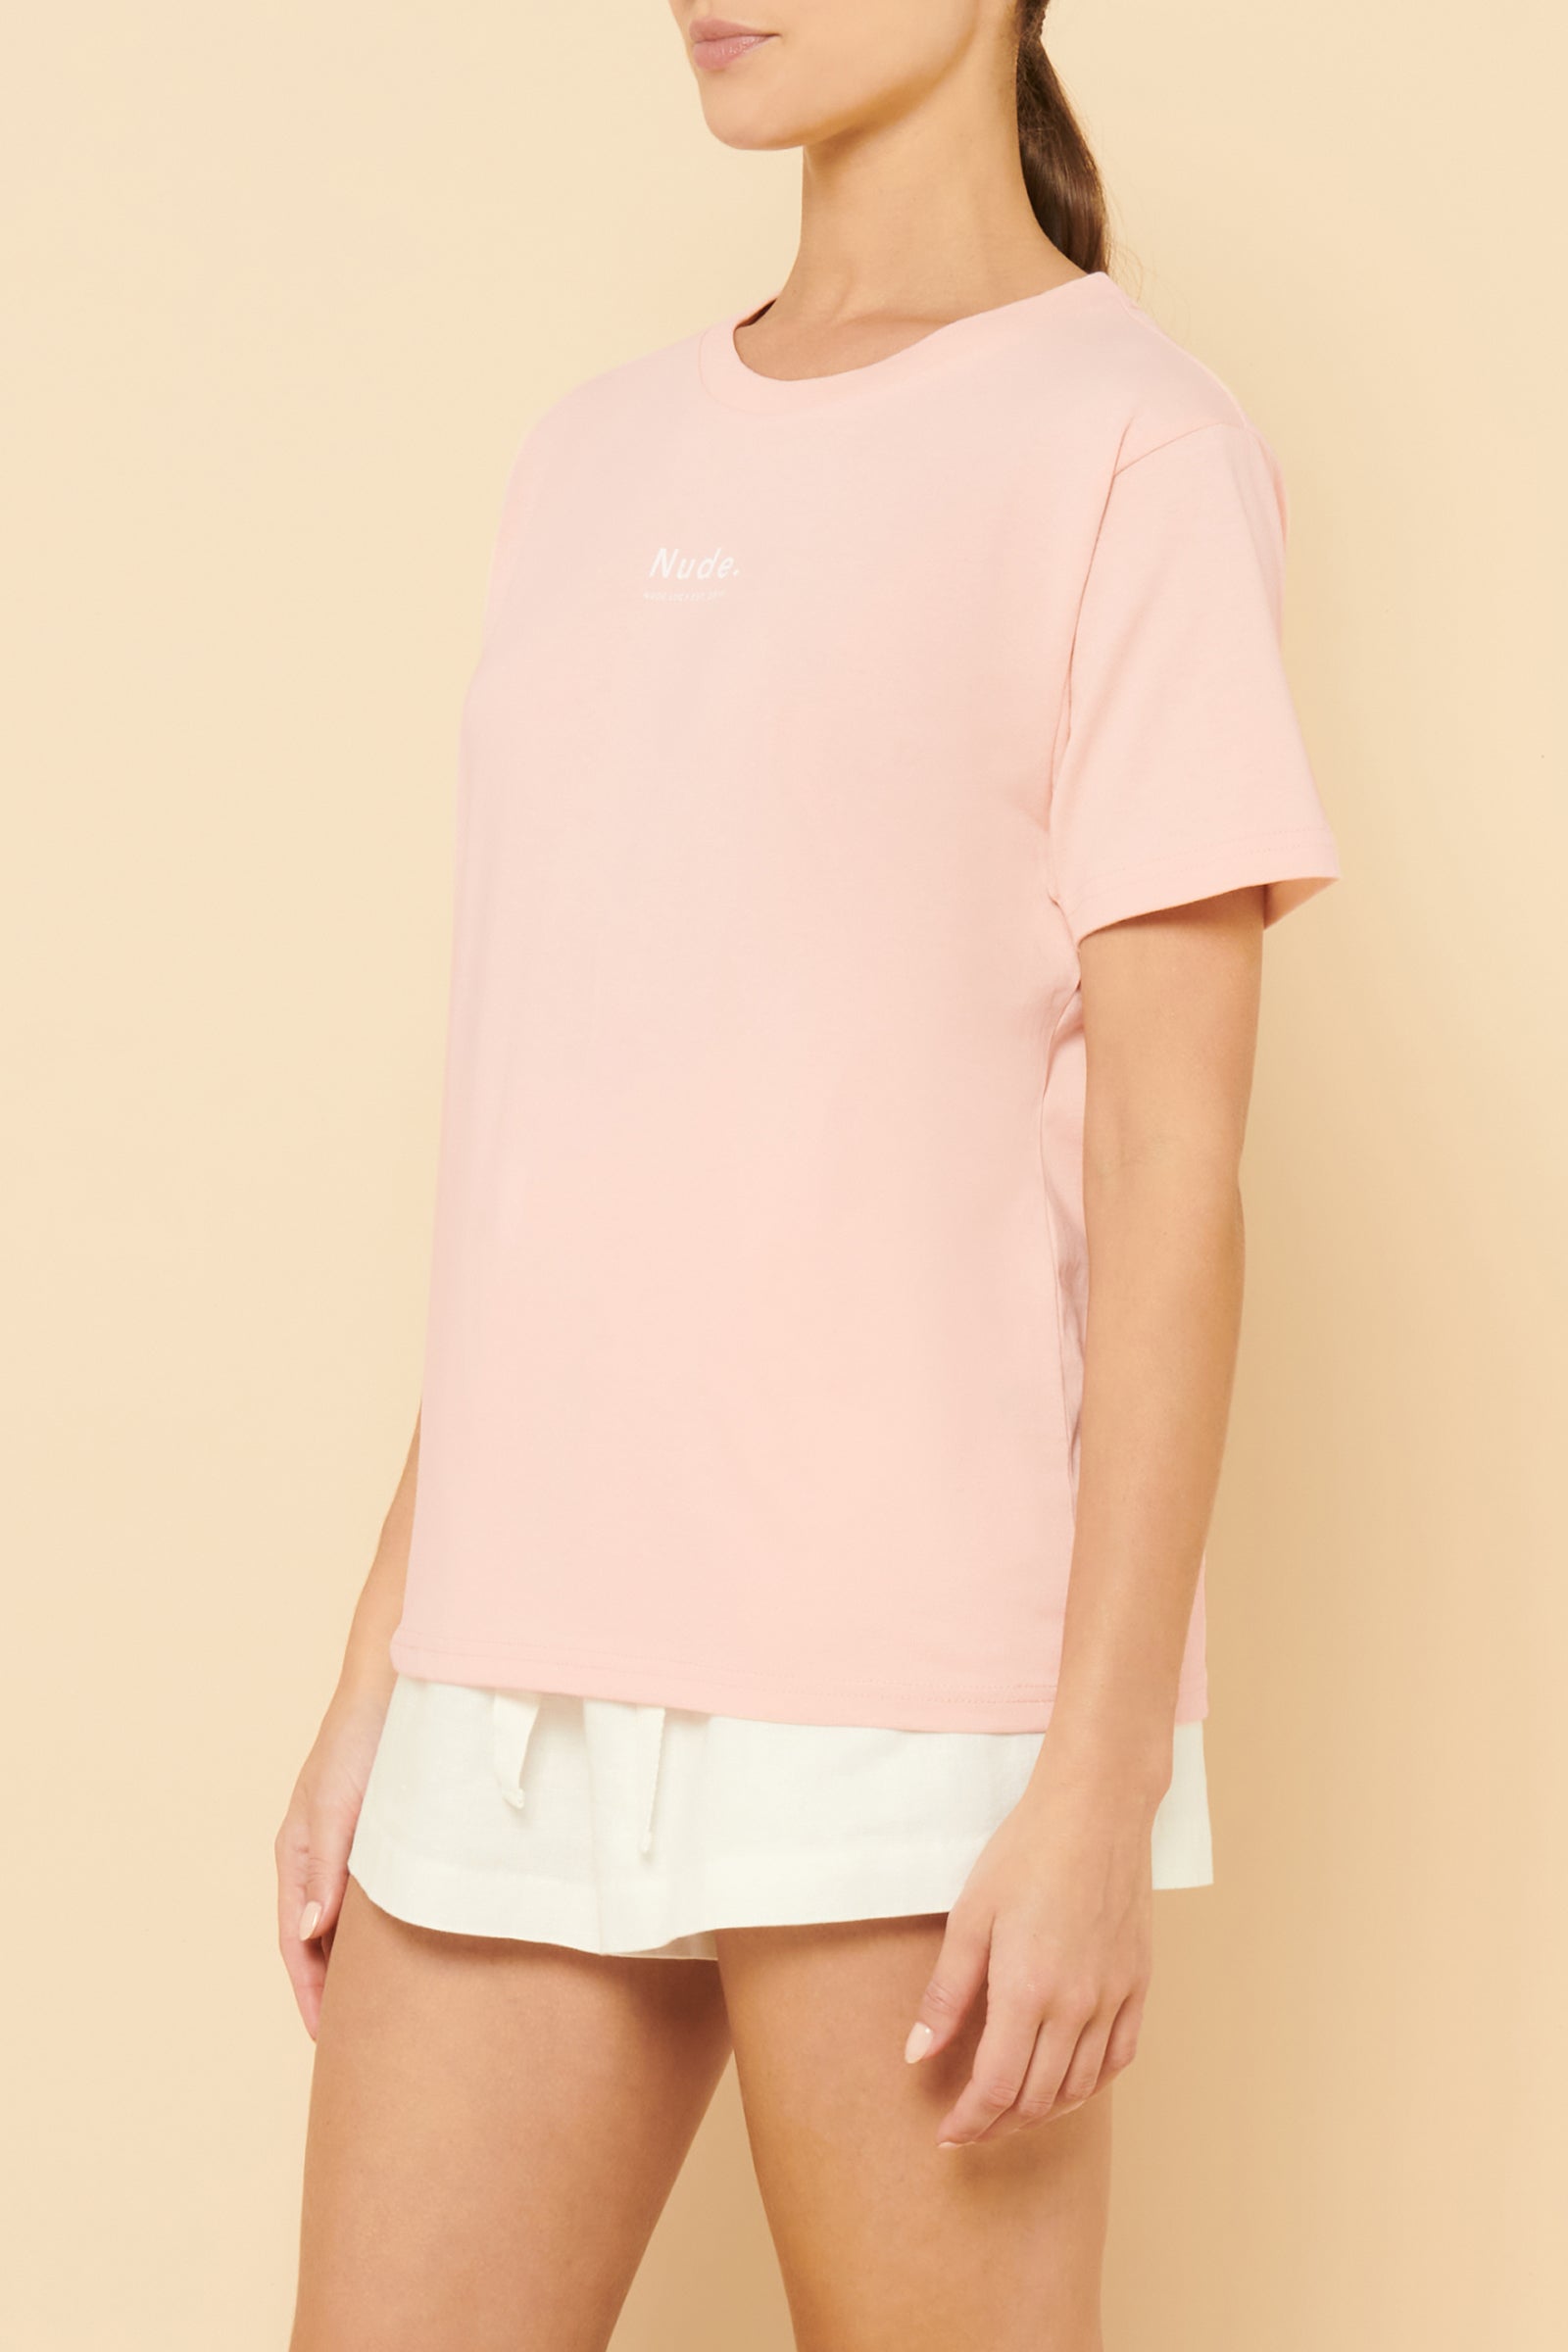 Nude Lucy Nude Organic Heritage Tee Mineral In Pink 